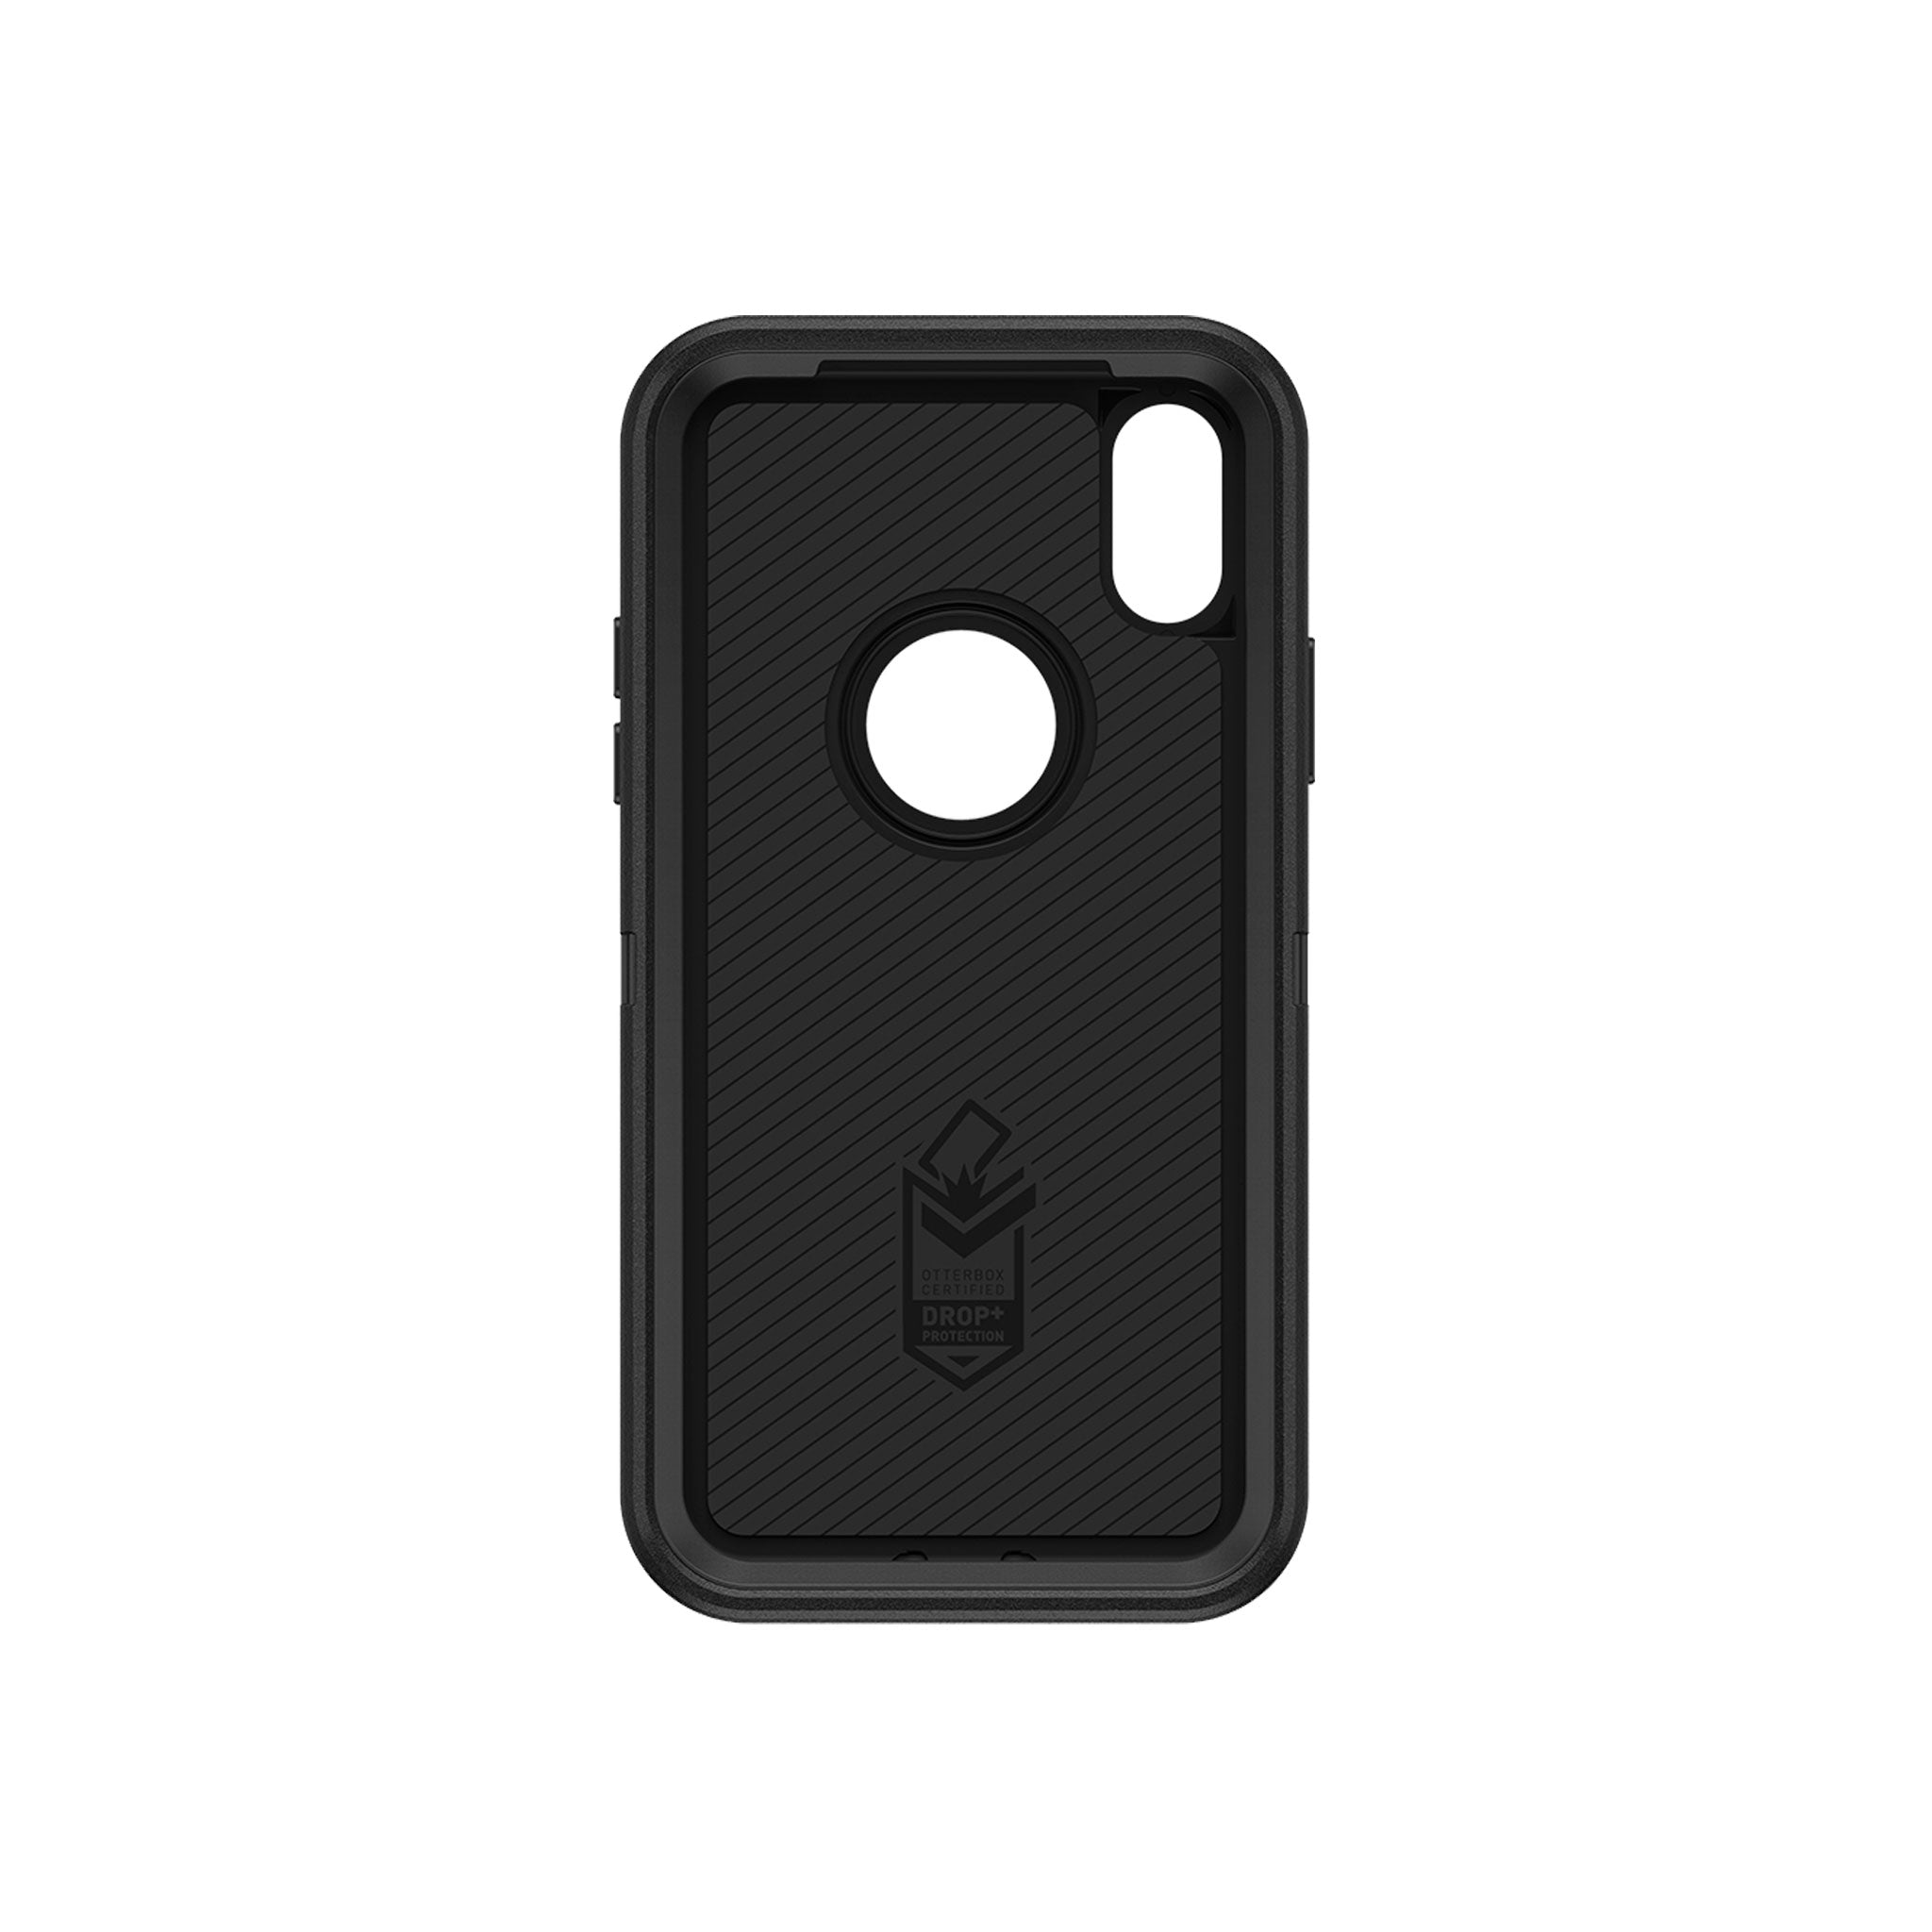 OtterBox - Defender Series Screenless Edition Case for iPhone X / XS - Black